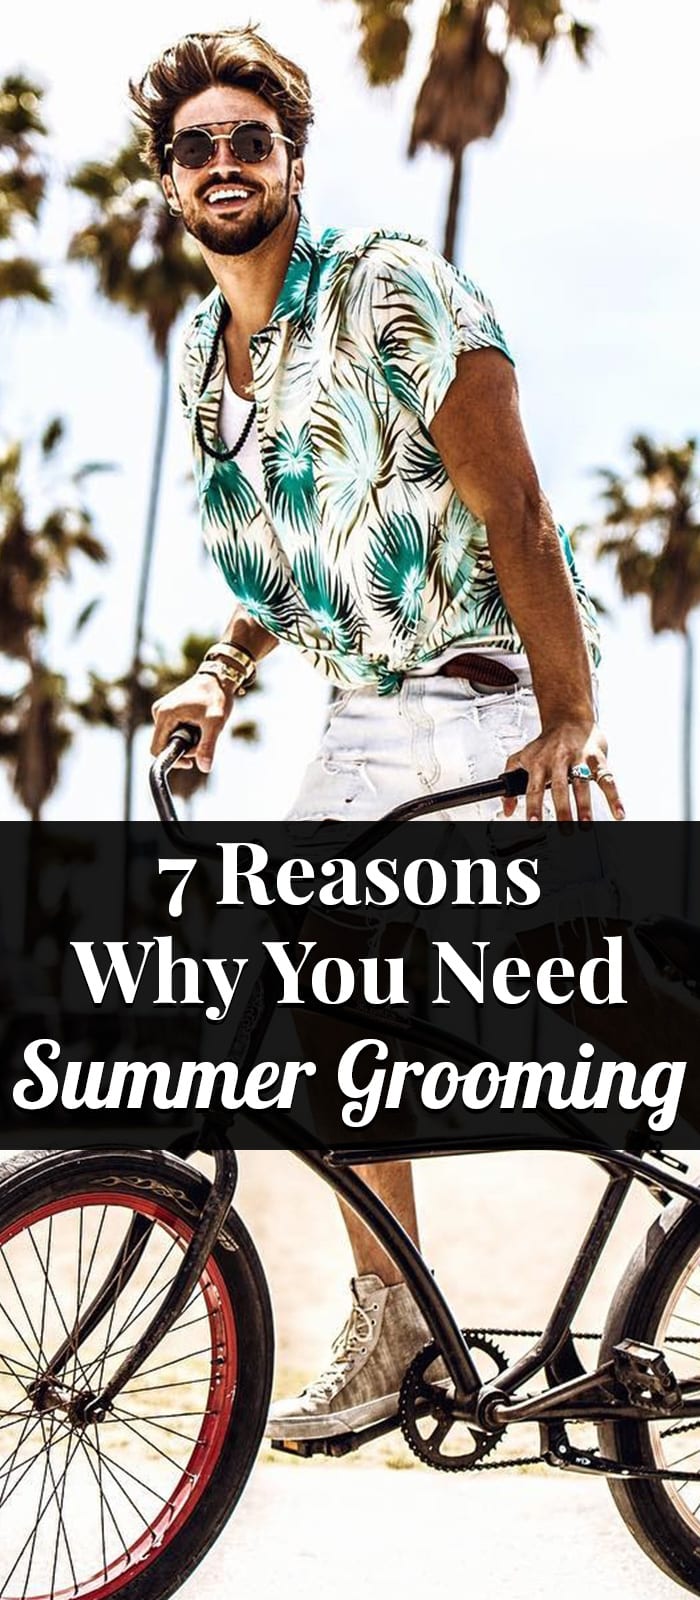 7 Reasons Why You Need Summer Grooming